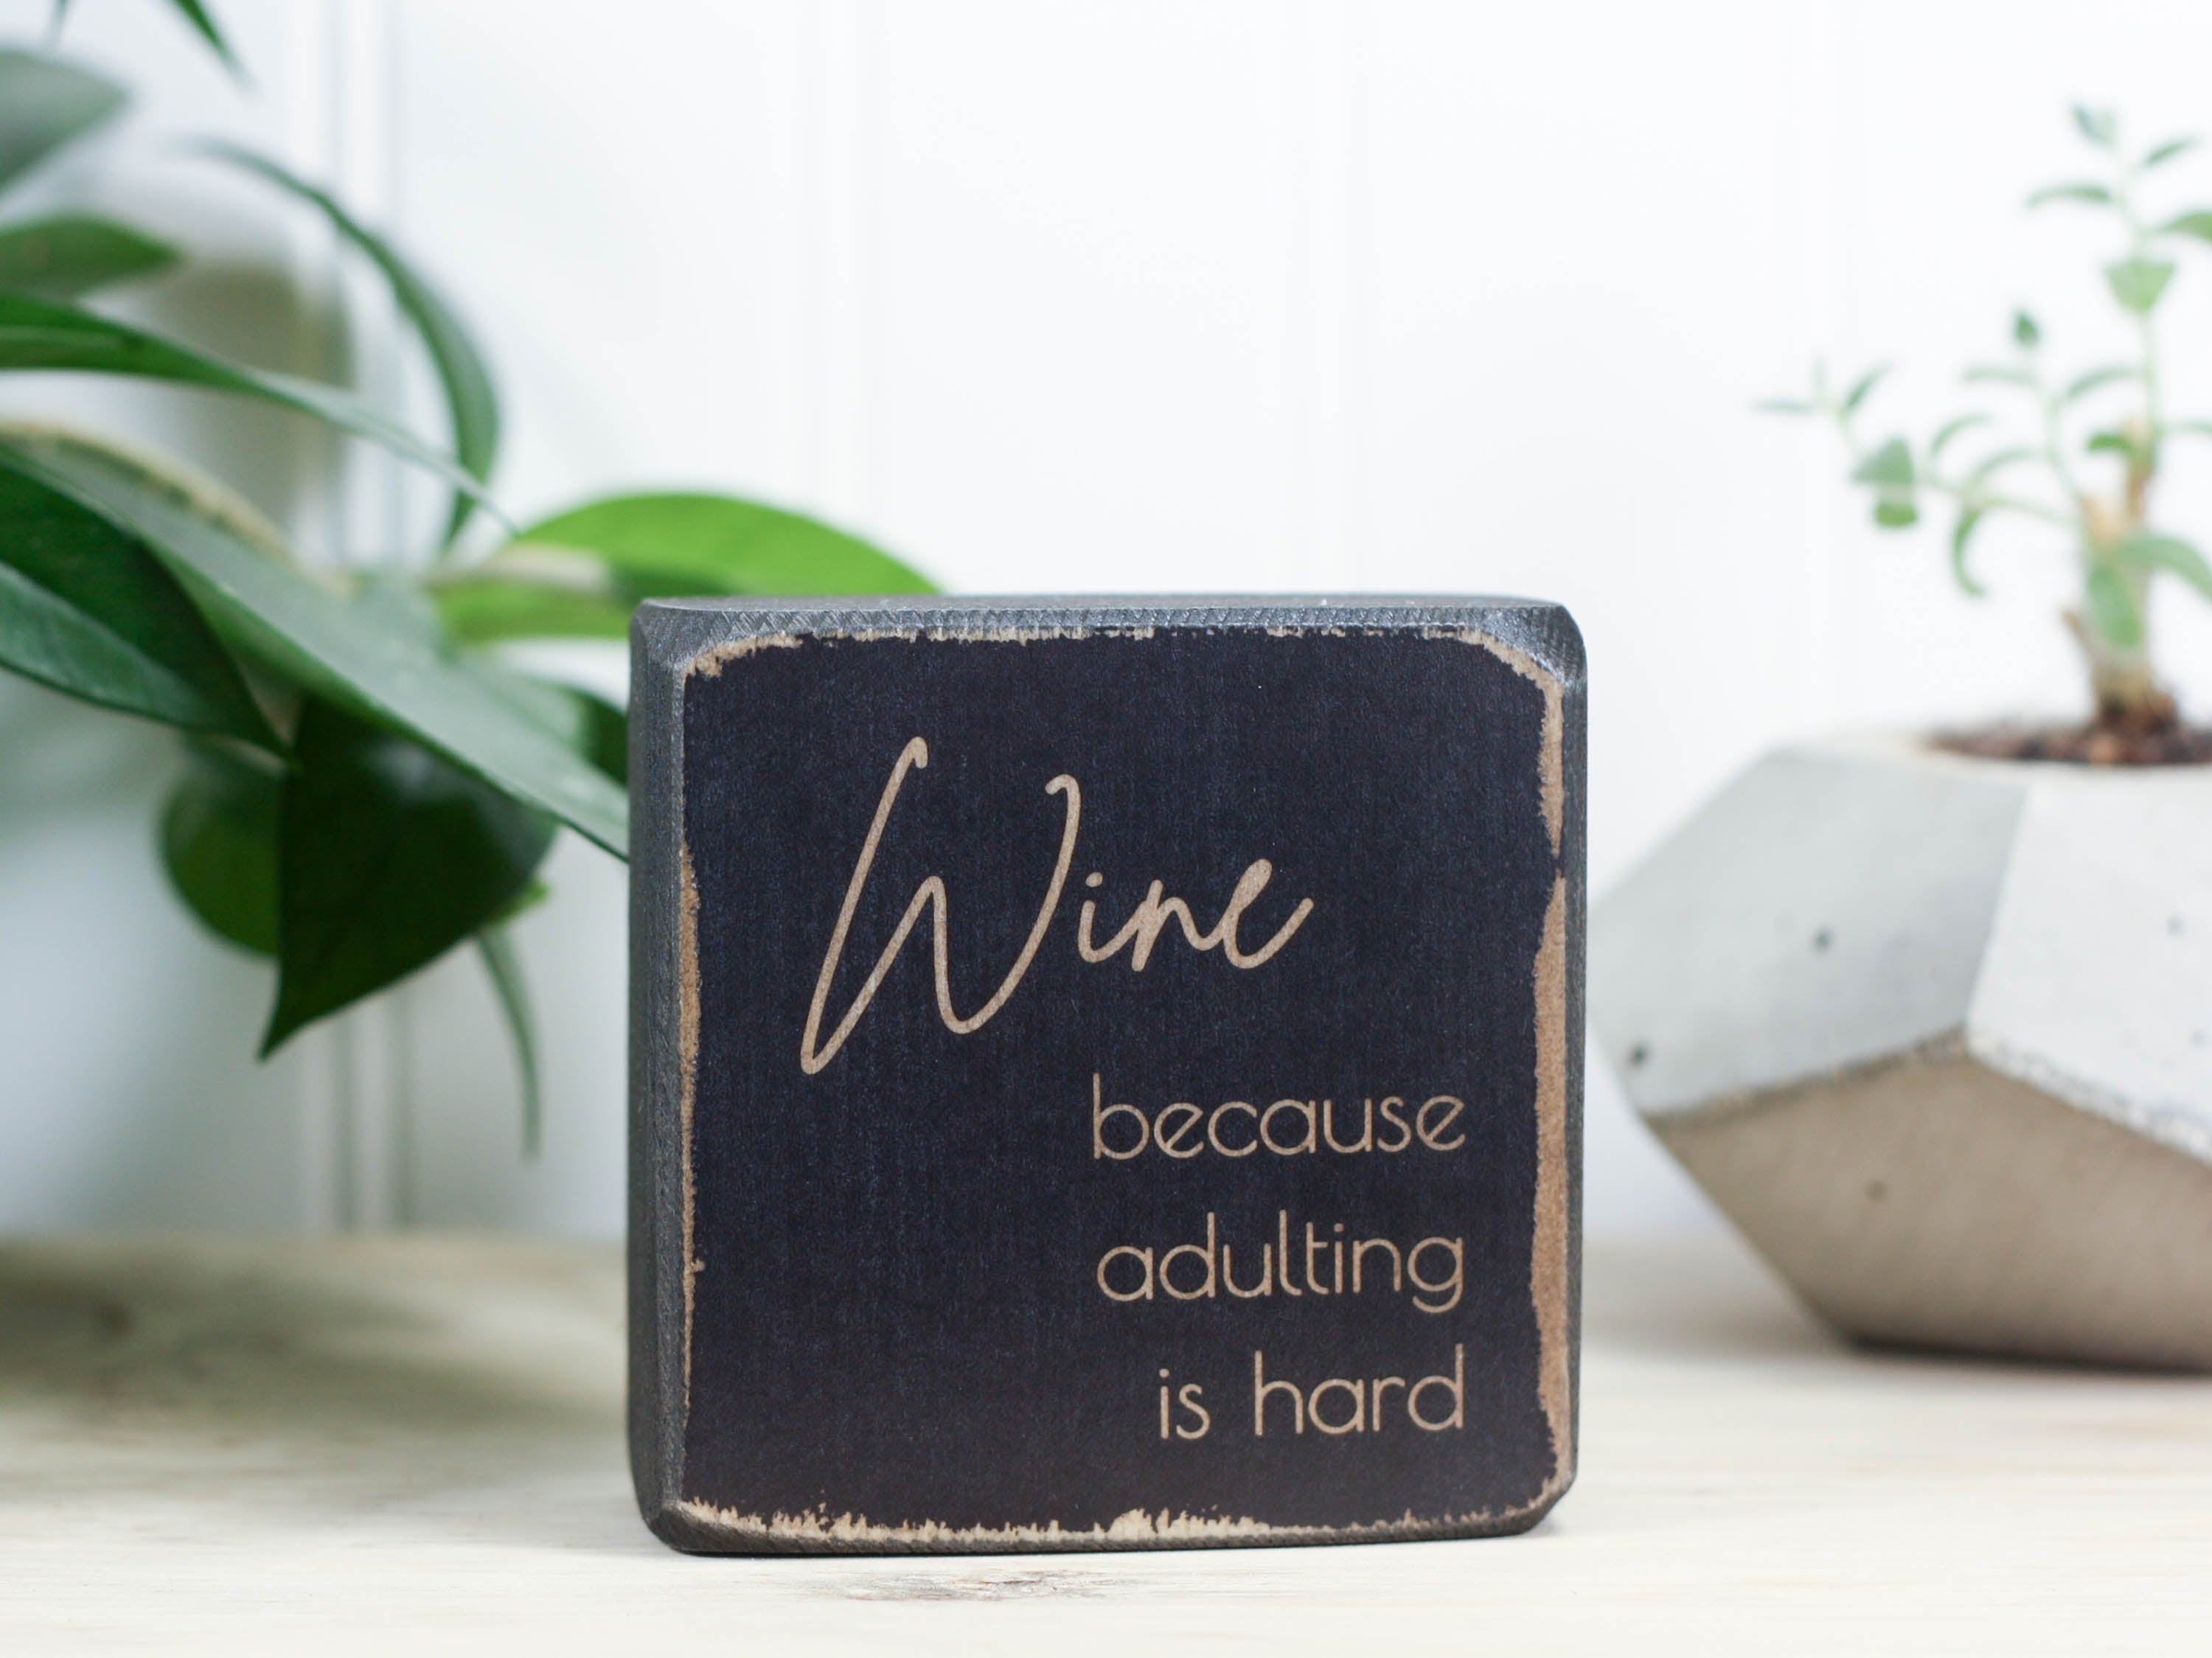 Mini wine bar sign in distressed black with the saying "Wine, because adulting is hard"